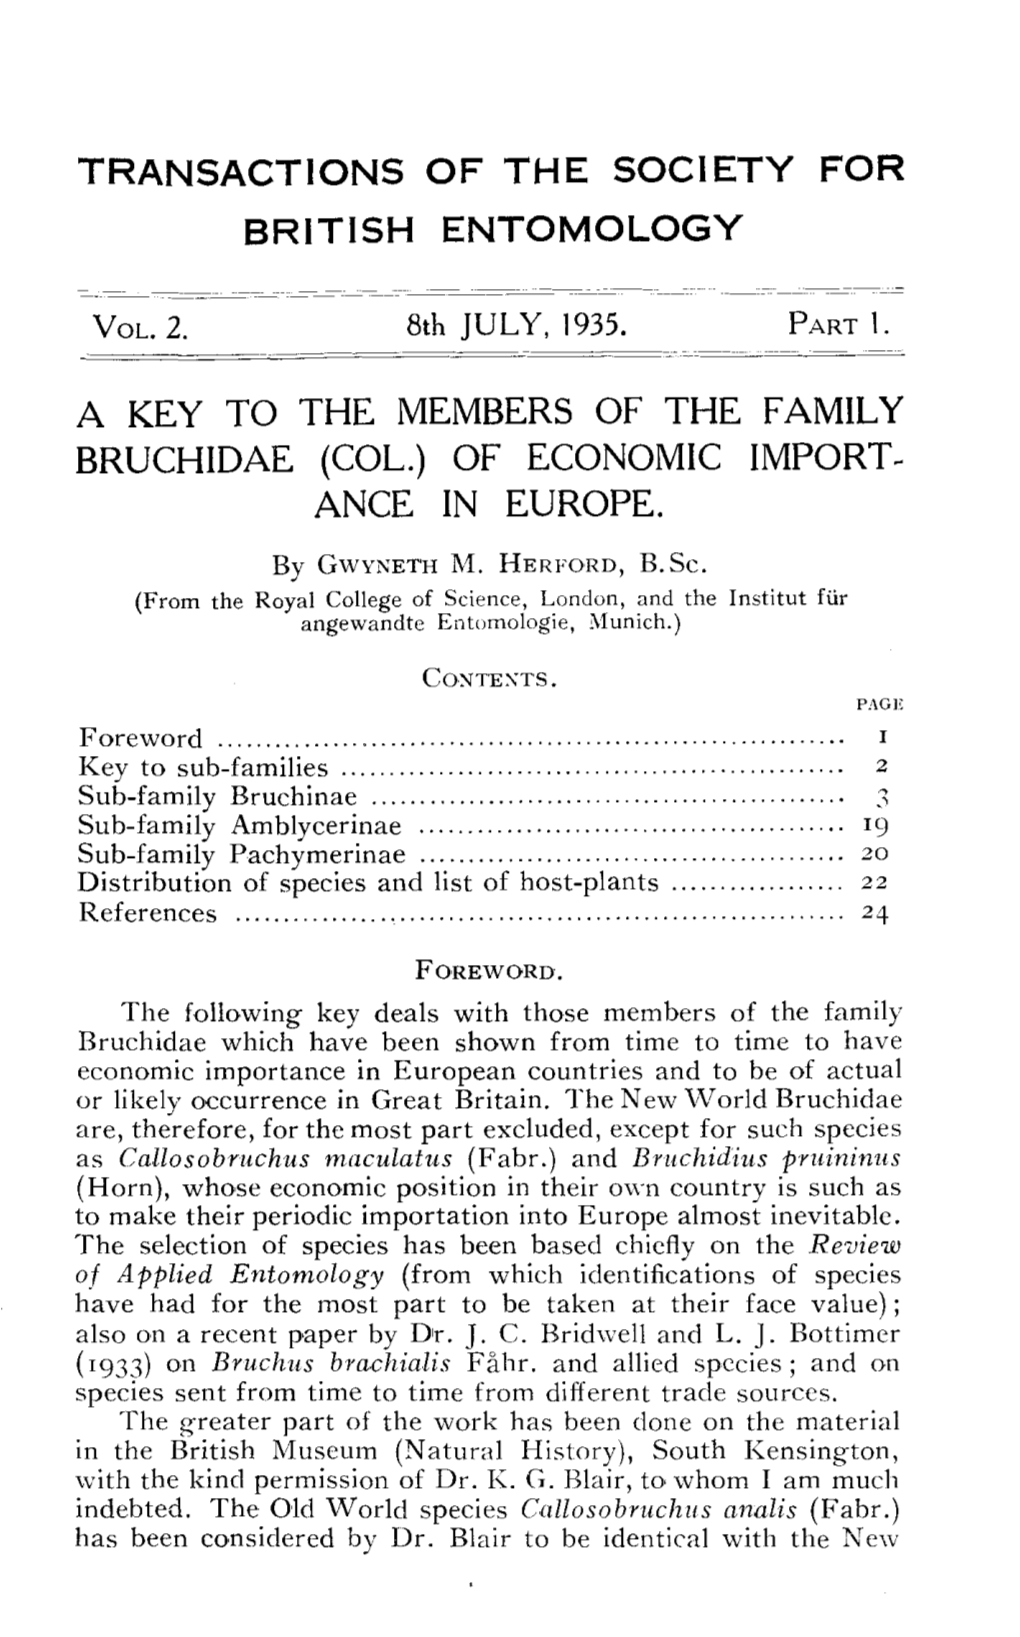 A Key to the Members of the Family Bruchidae (Col.) of Economic Import~ Ance in Europe